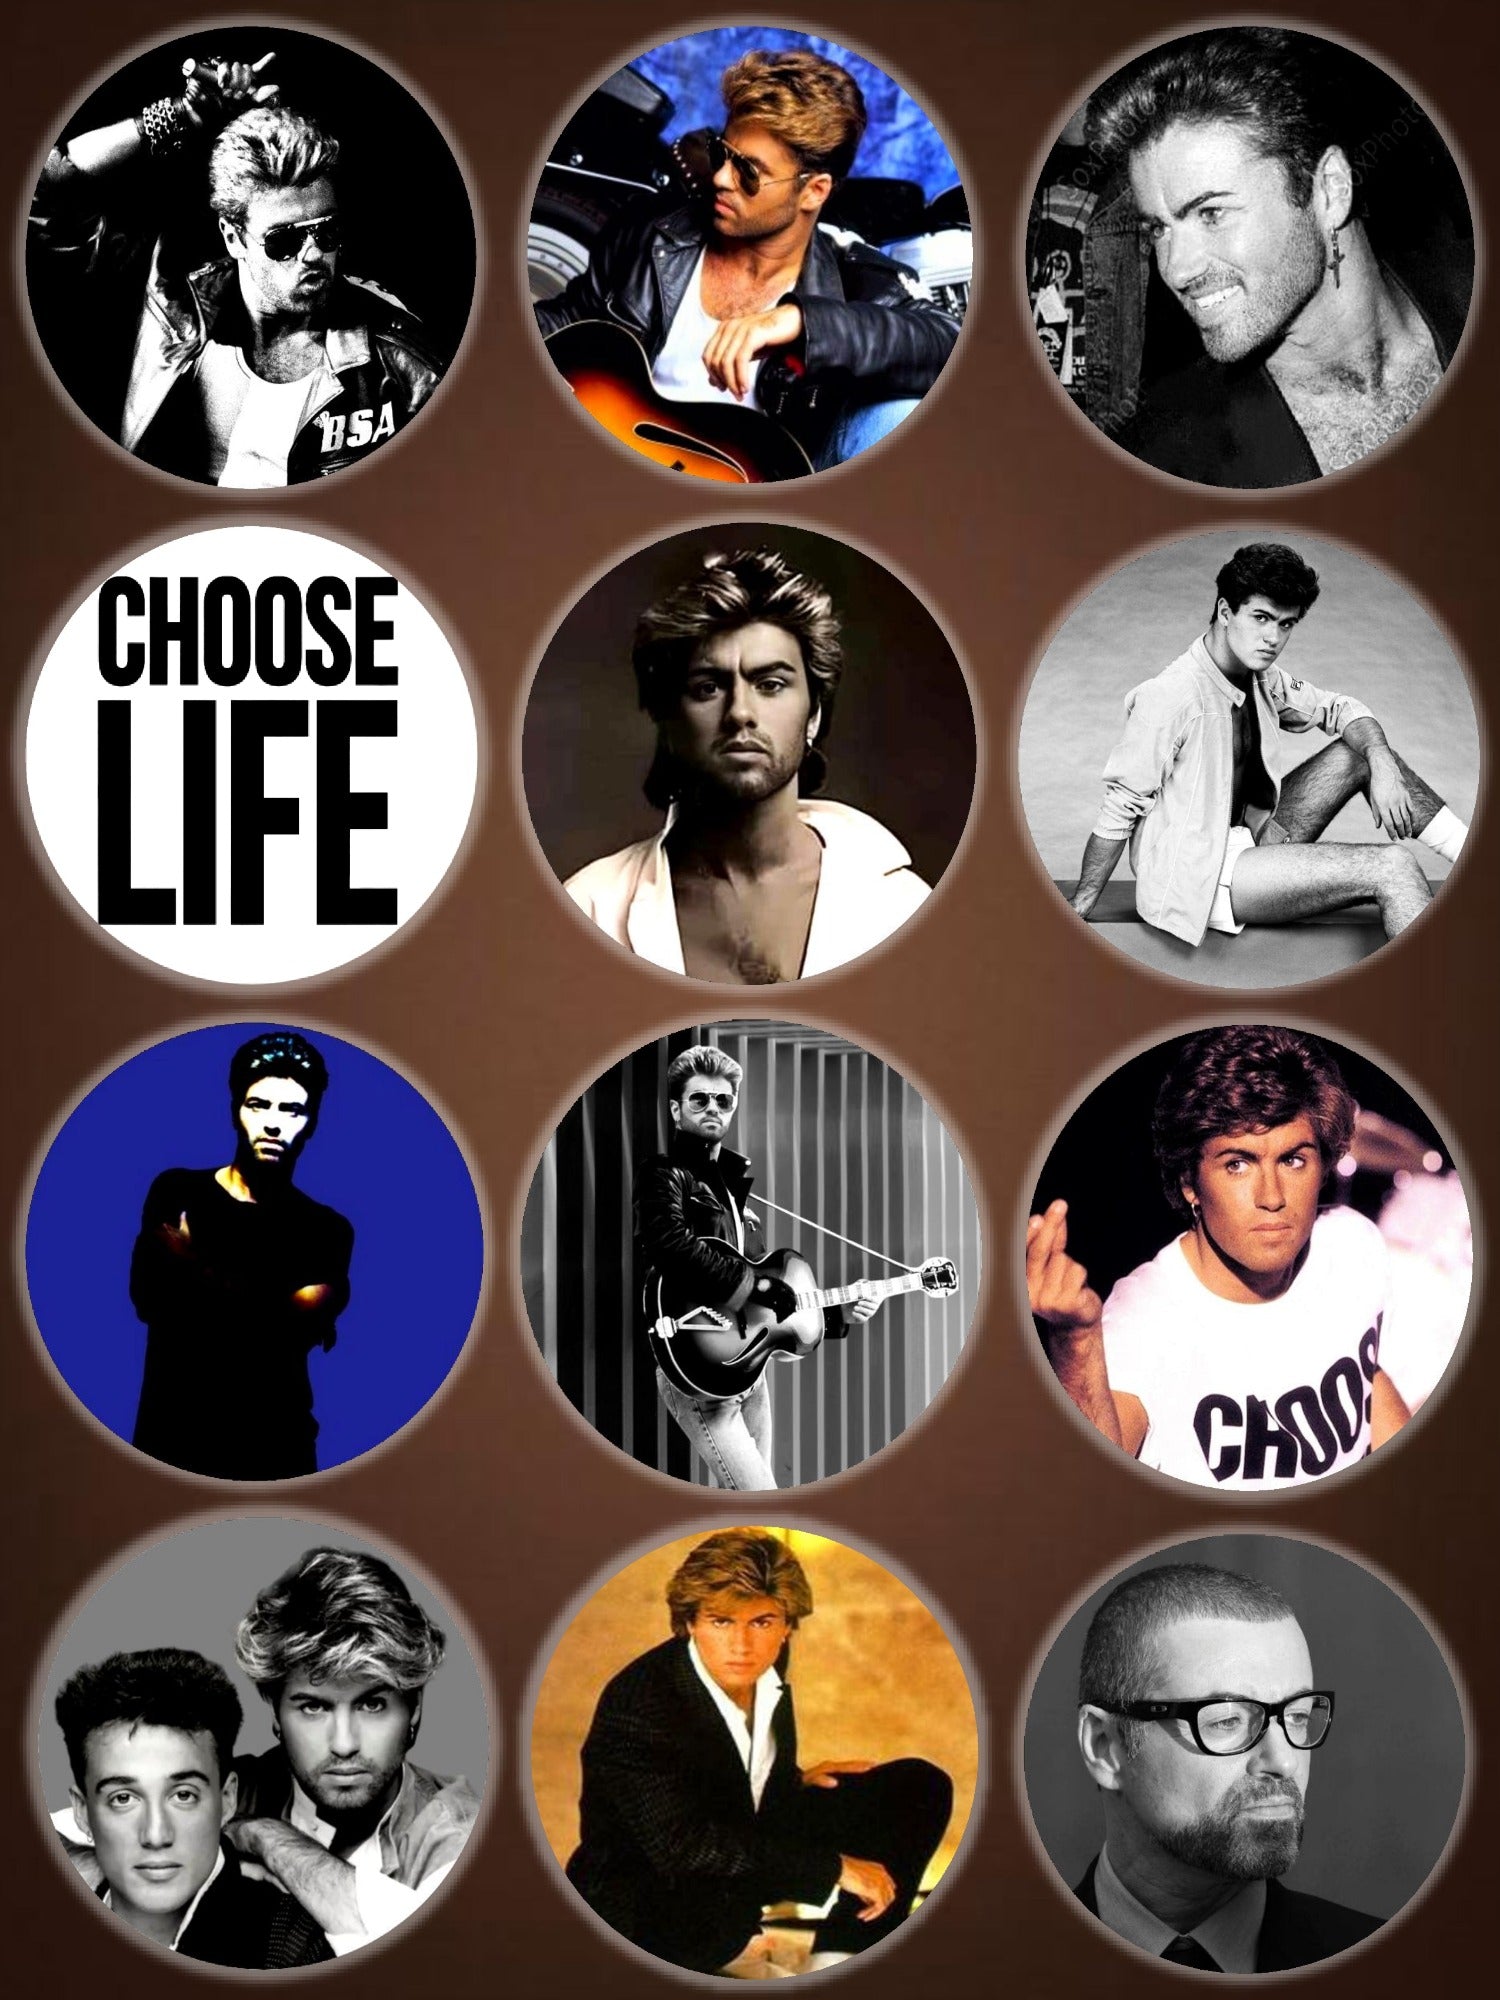 Custom Handmade George Michael Choose Life Magnet Collection For Sale In AREA51GALLERY New Orleans A Gay Owned Small Business.